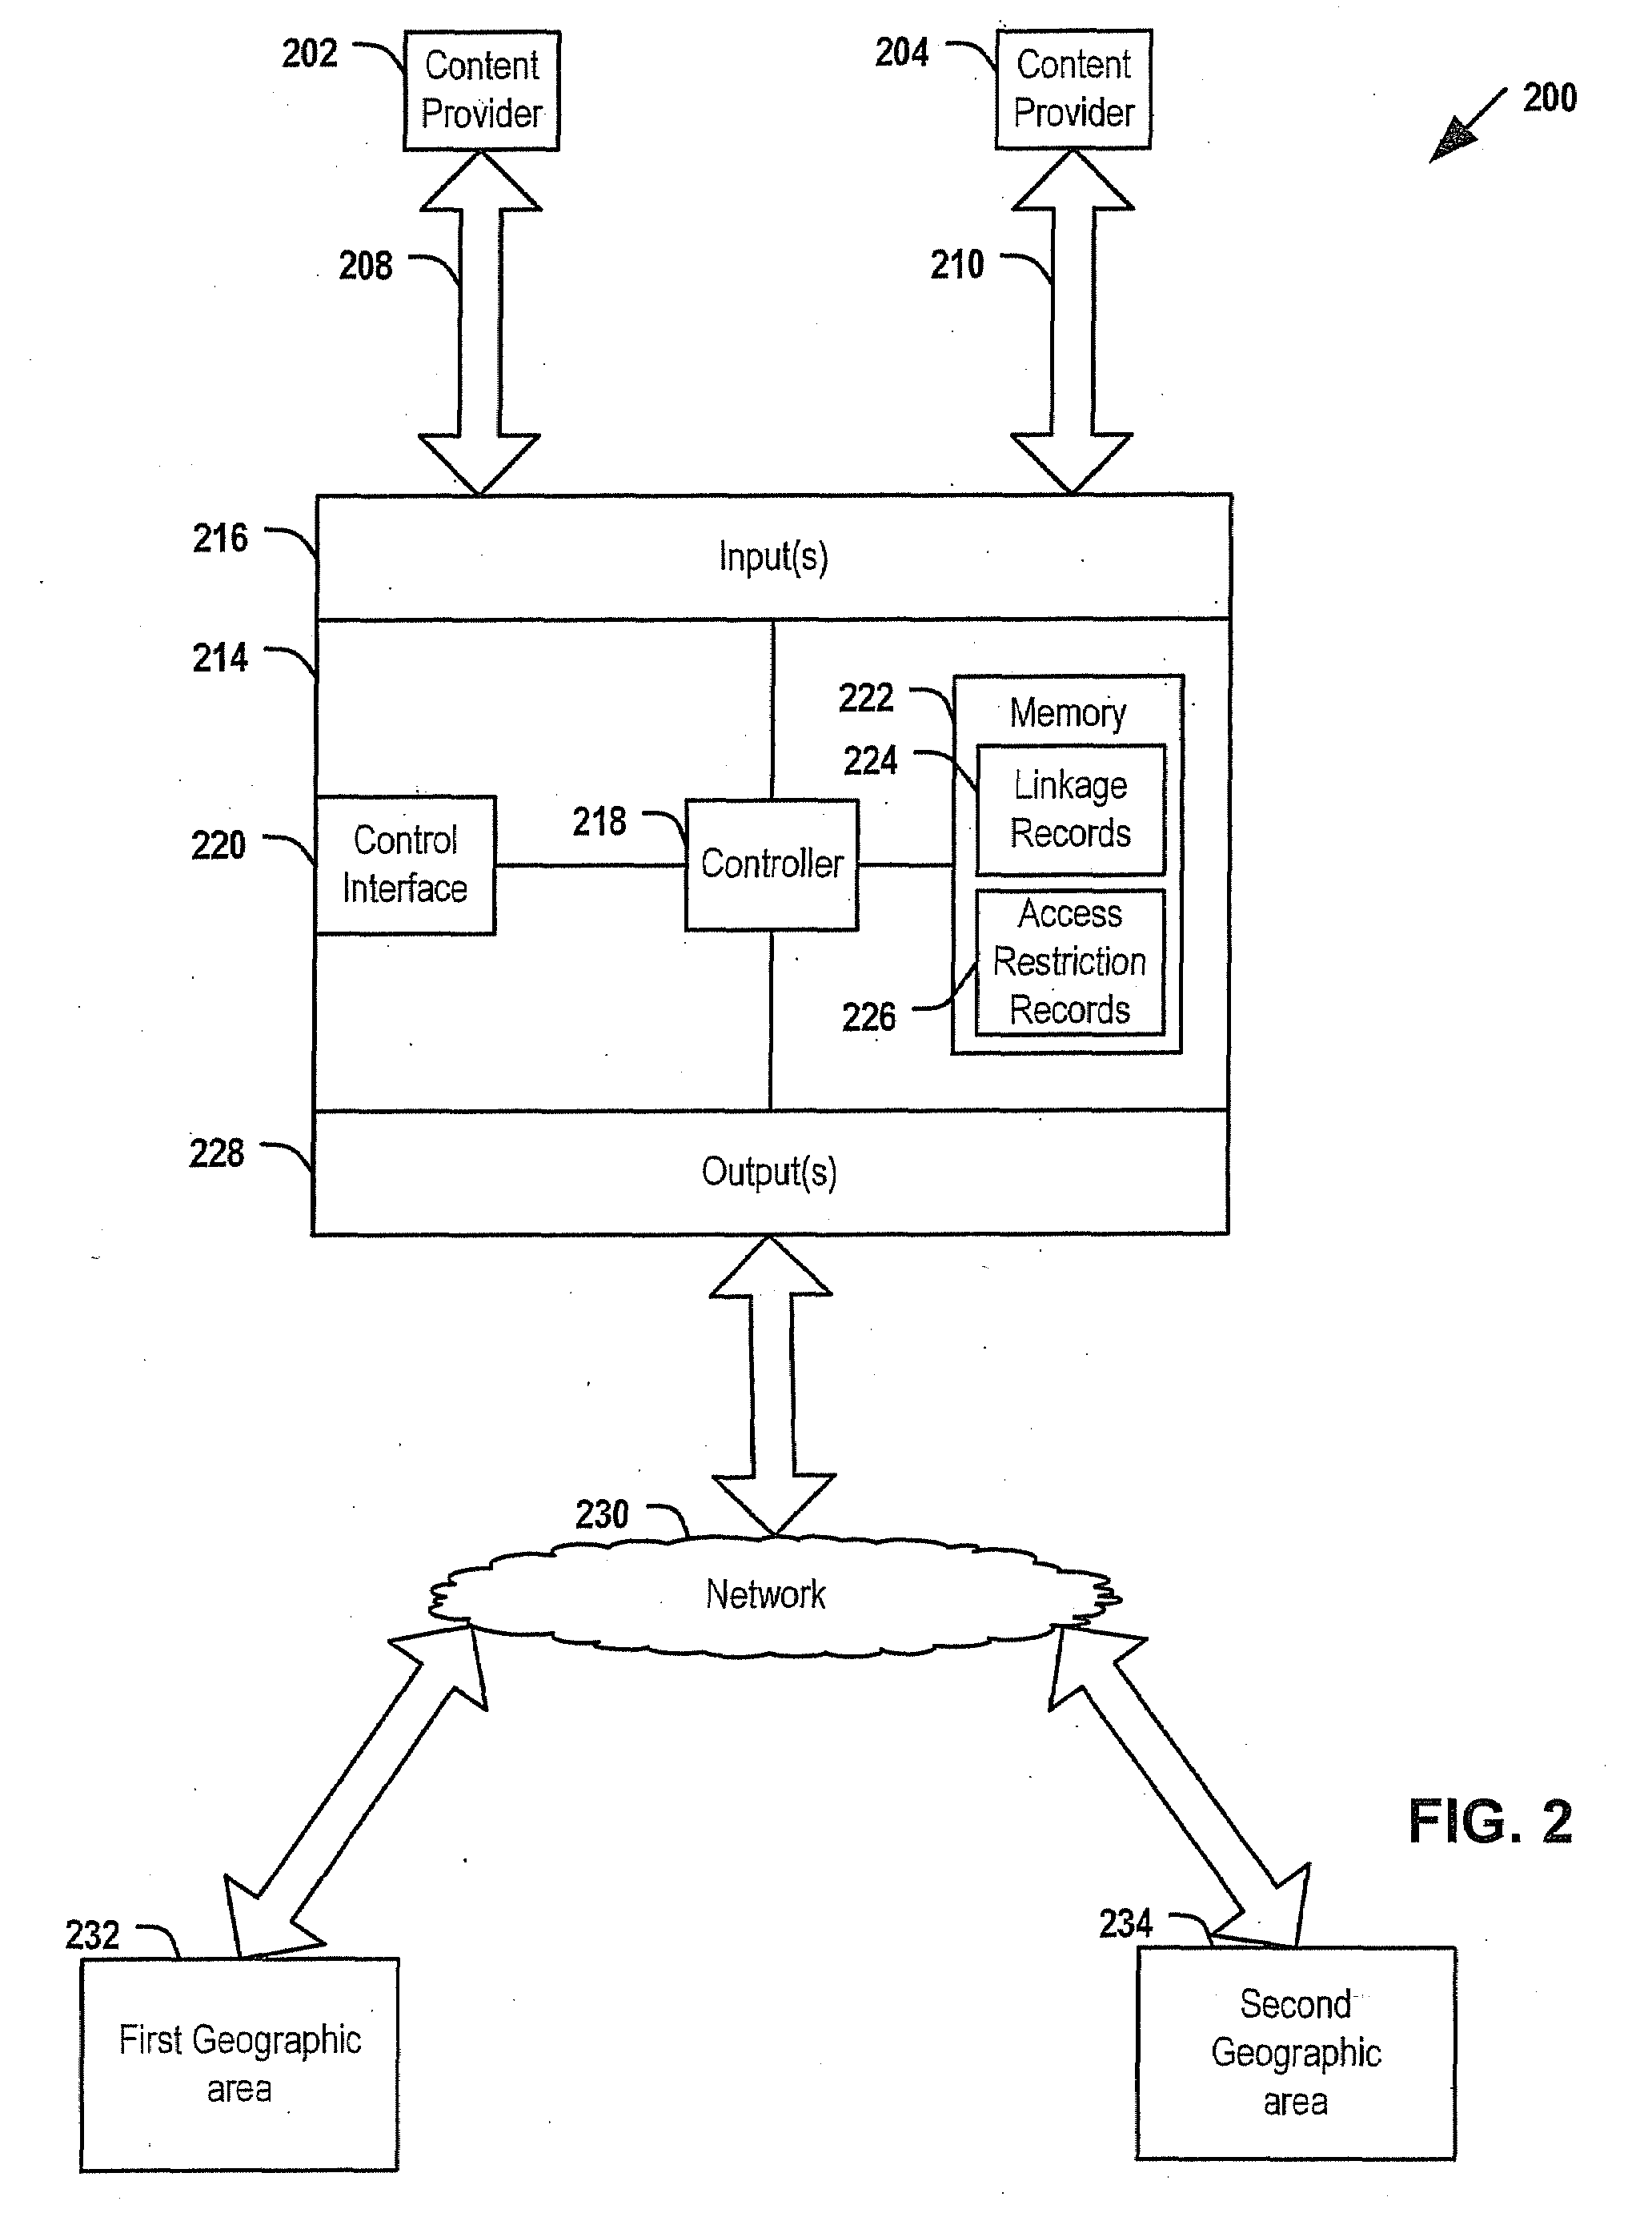 System and Method for Monitoring and Alarming IP-Based Video Blackout Events